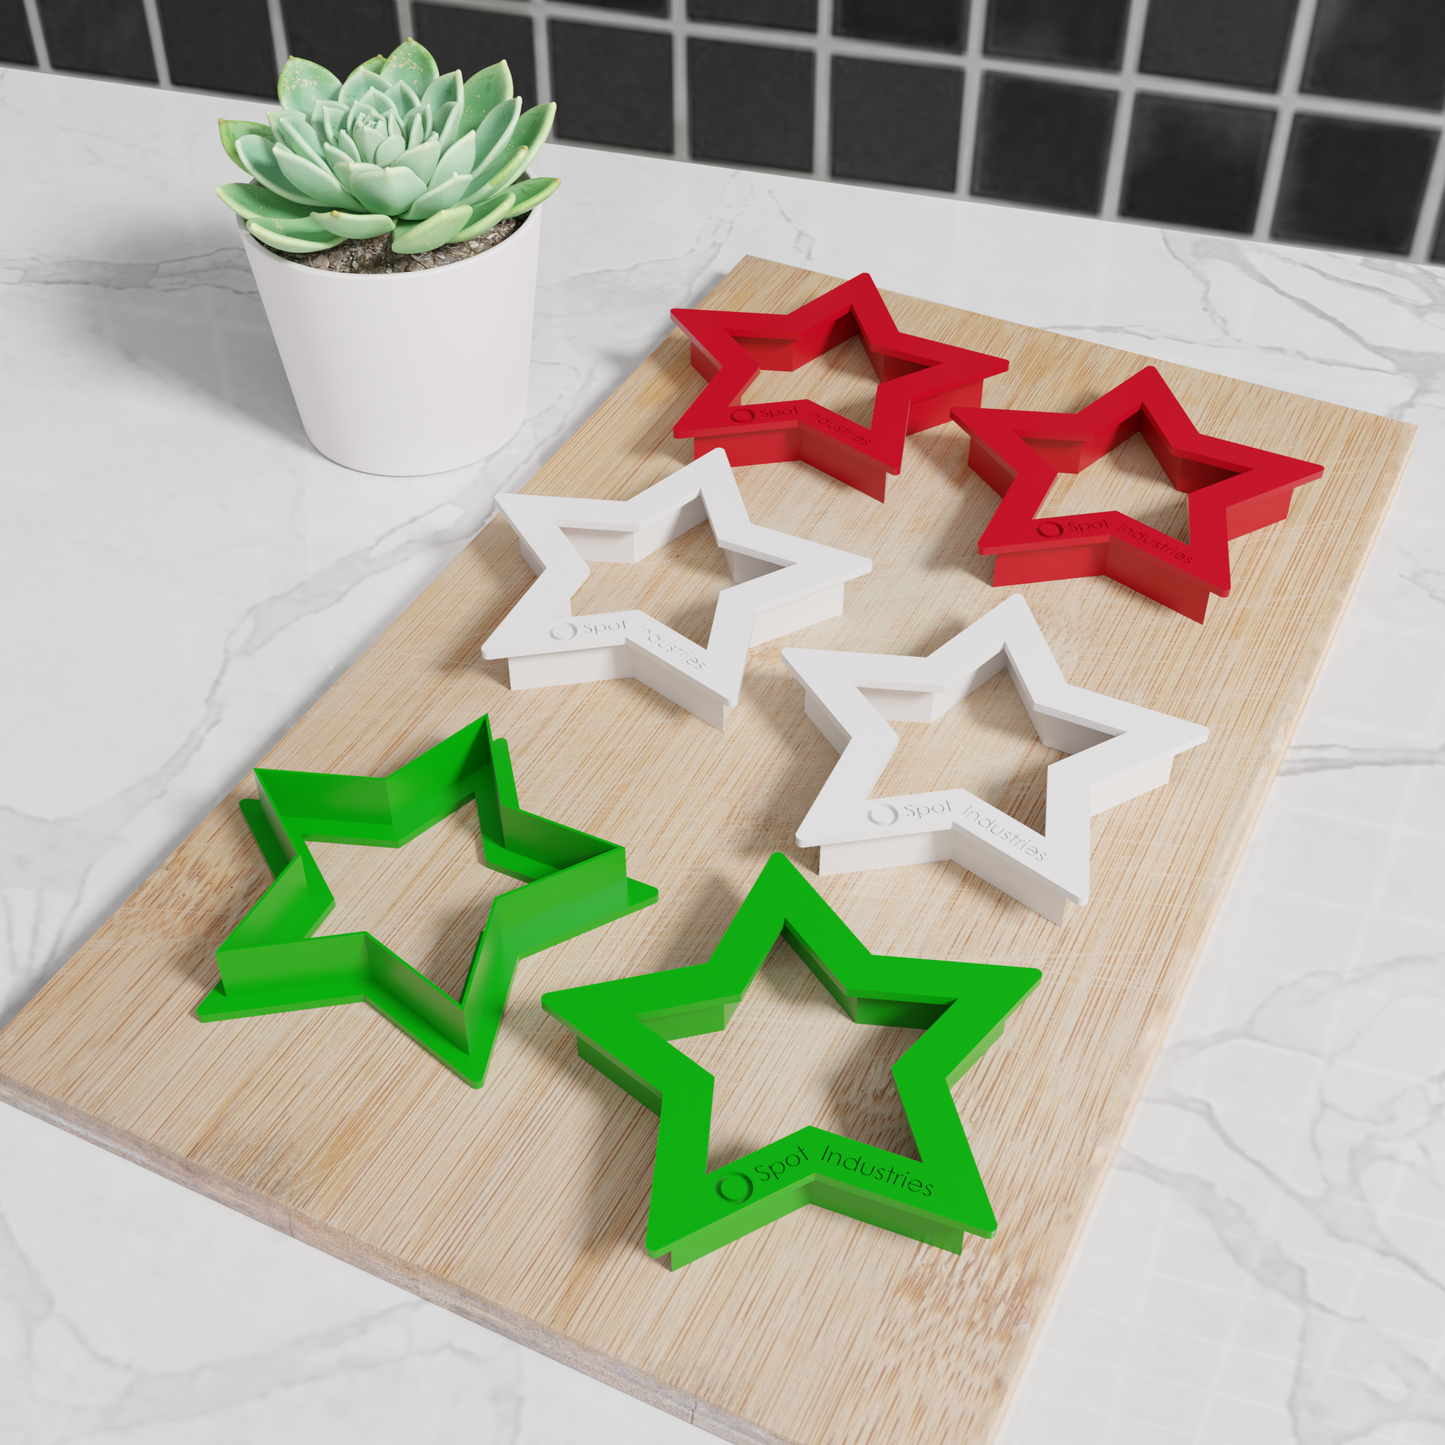 Star Shape Cookie Cutter Set For Kids & Adults! Custom Sizes, Multiple Colors. Work As Clay Cutter And Fondant Cutter Too!